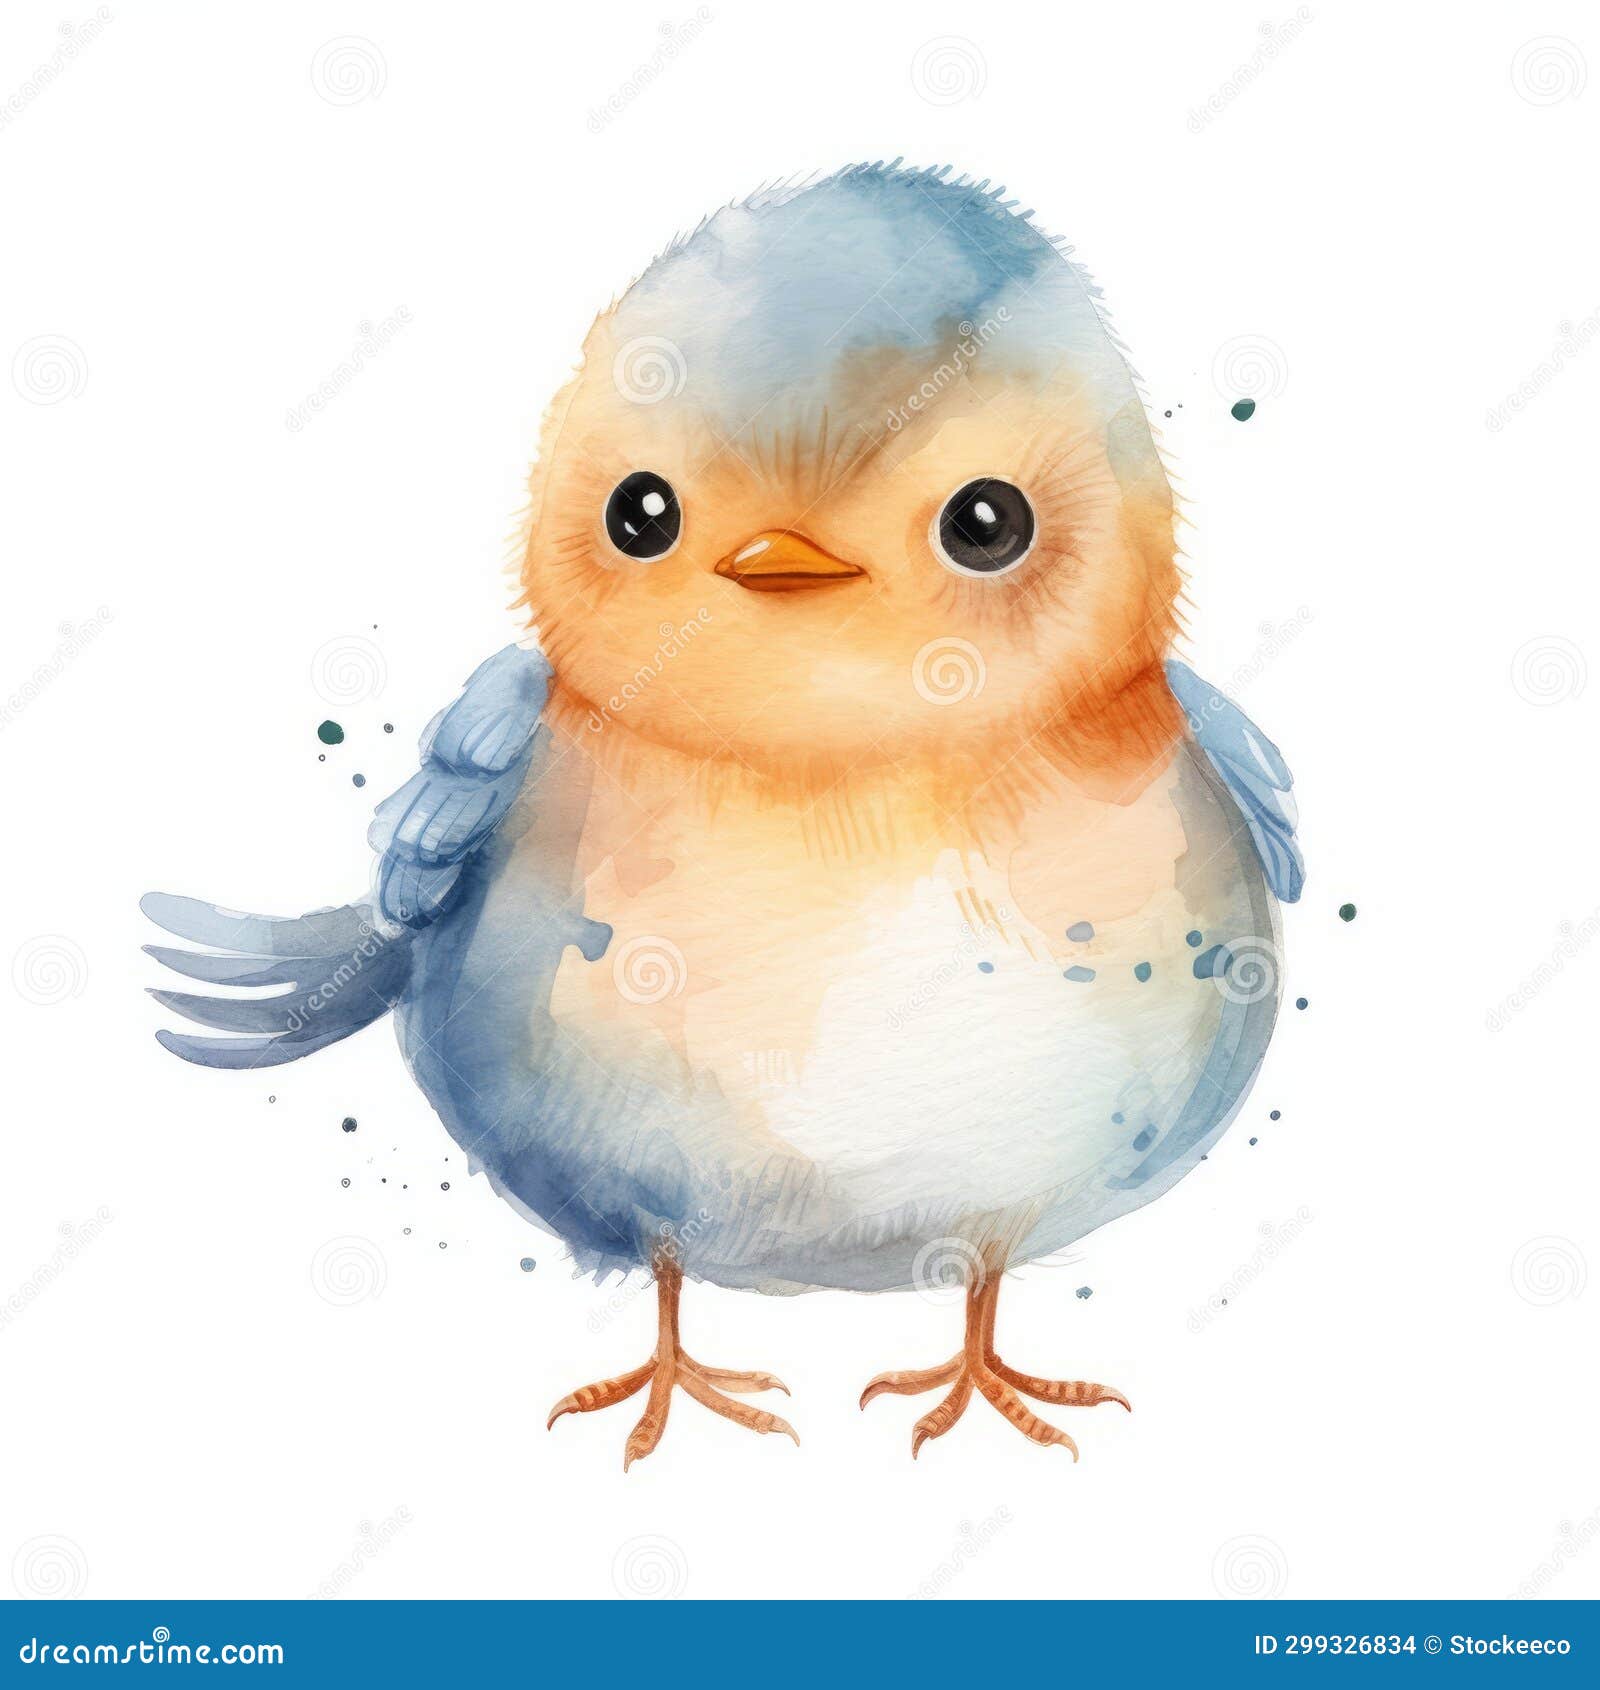 Charming Watercolor Illustration of a Cute Baby Bird Stock Illustration ...